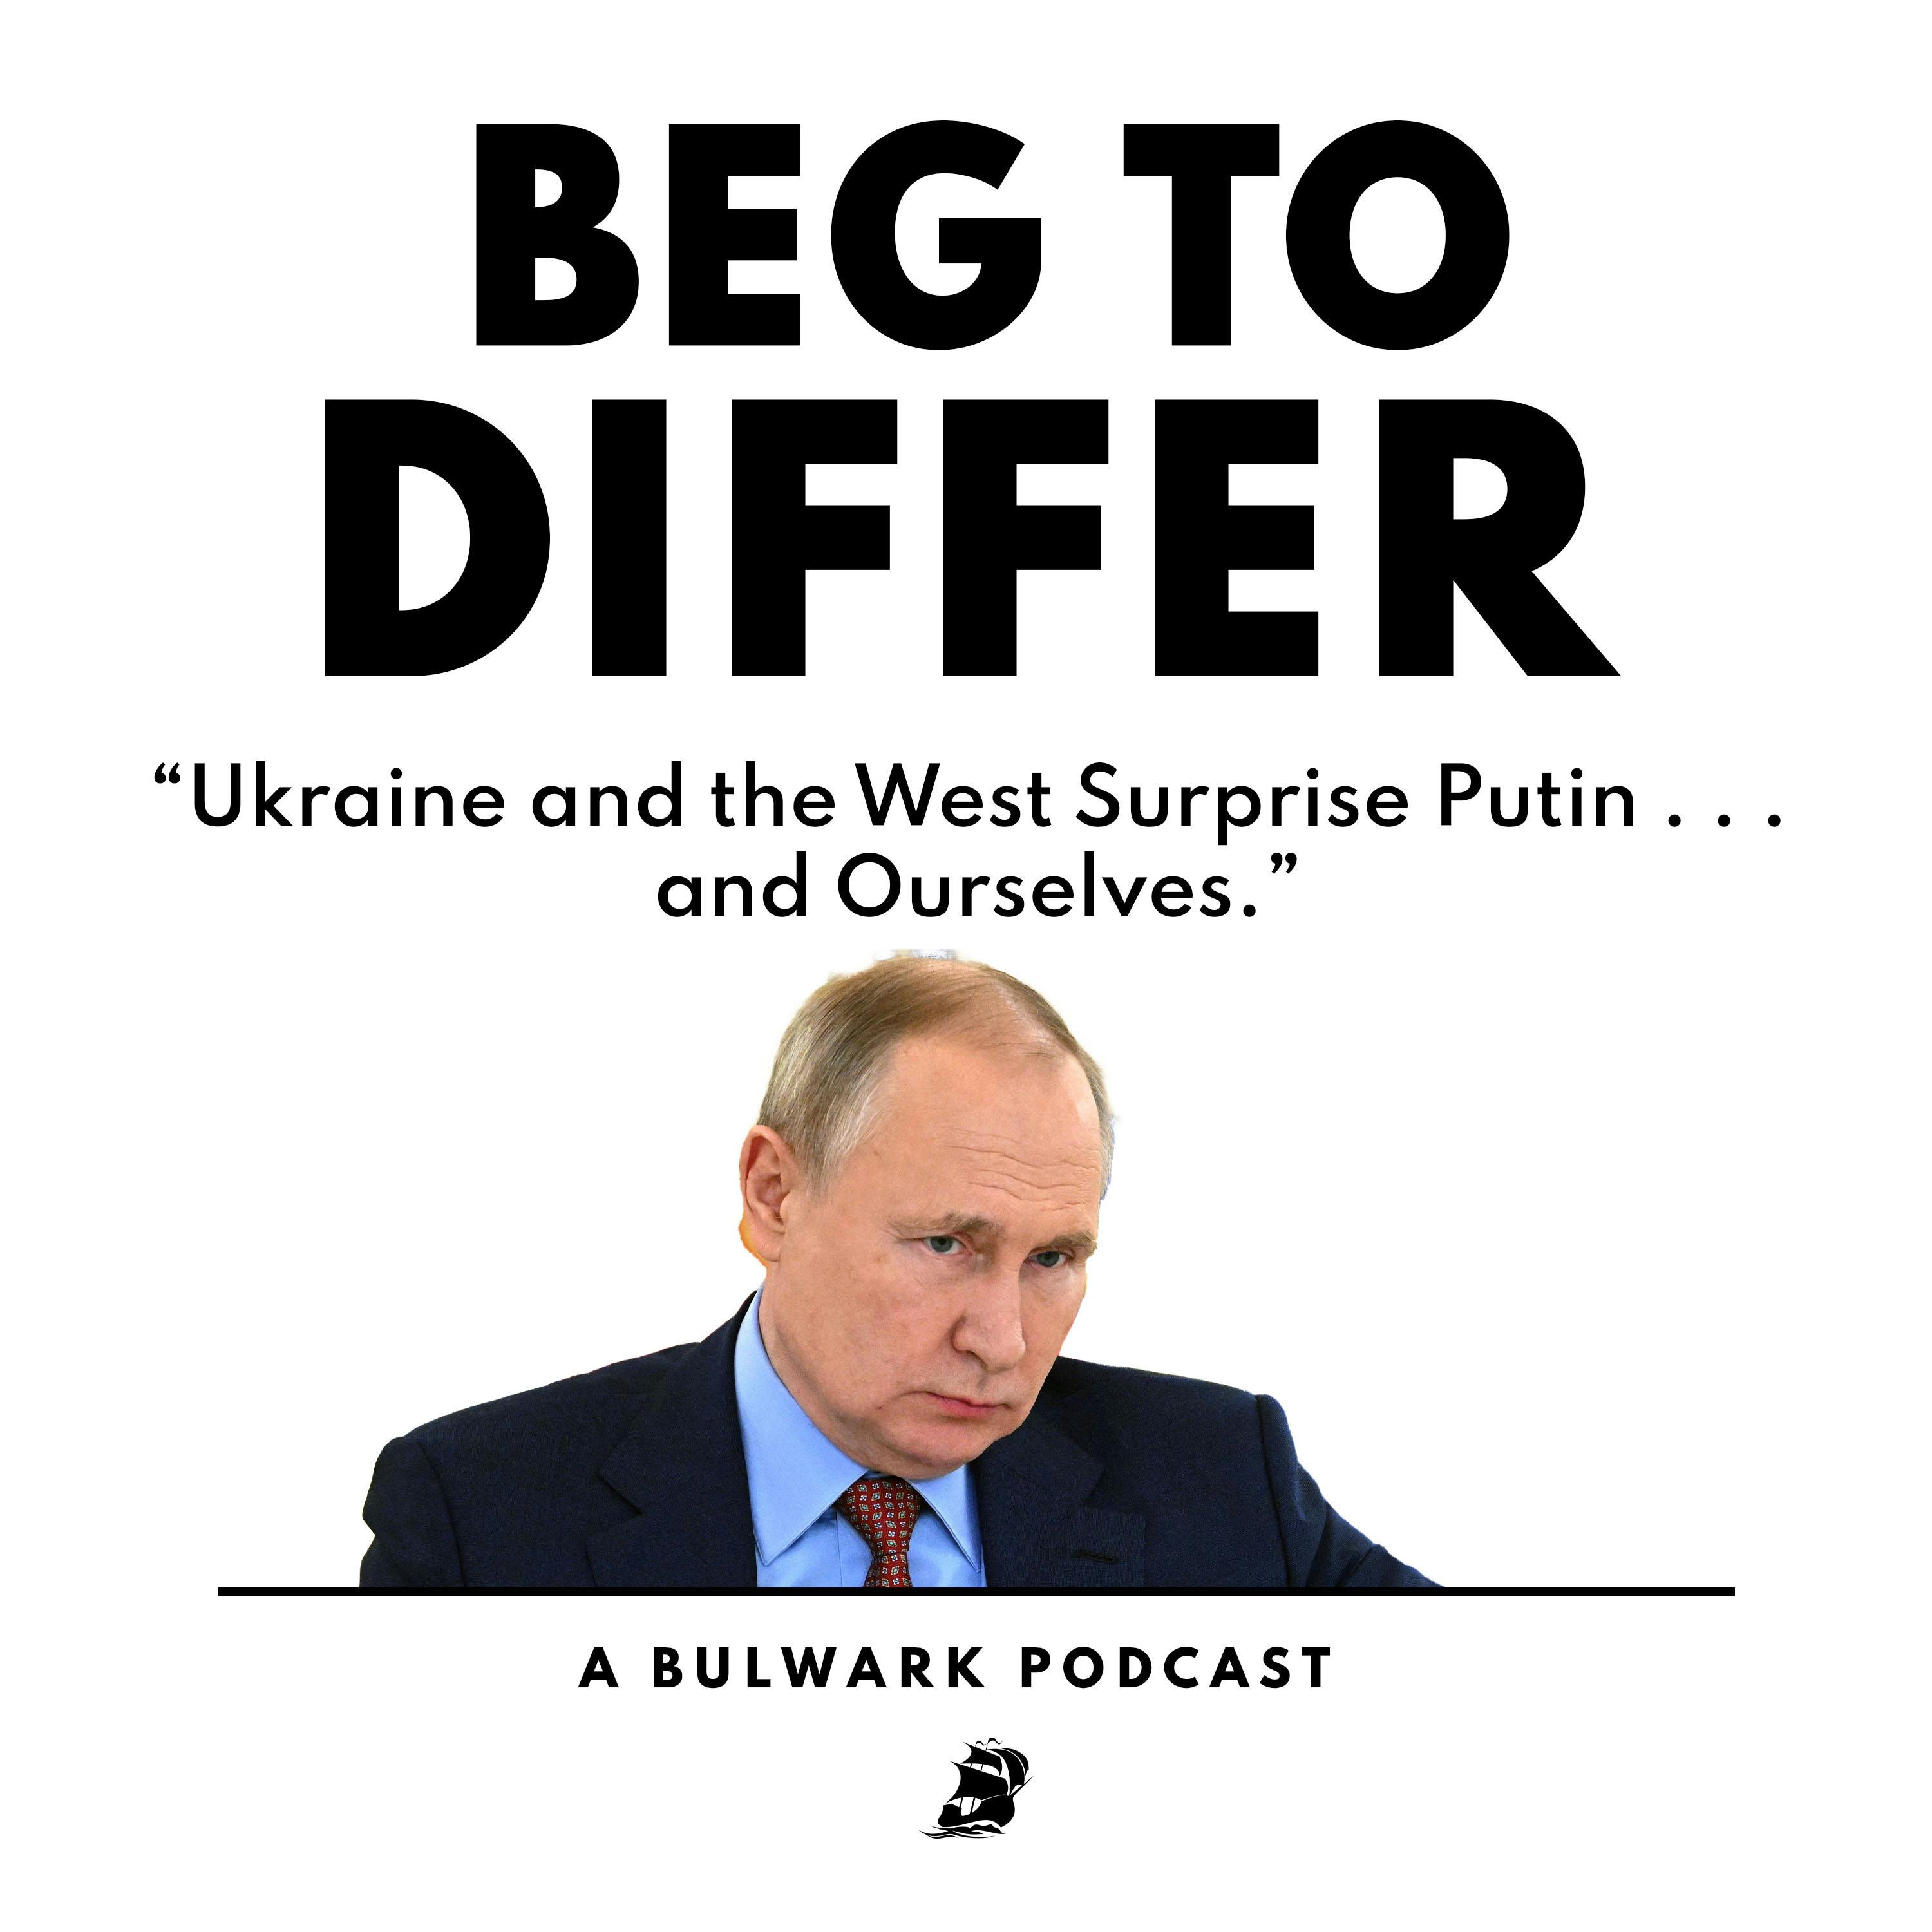 Ukraine and the West Surprise Putin . . . and Ourselves